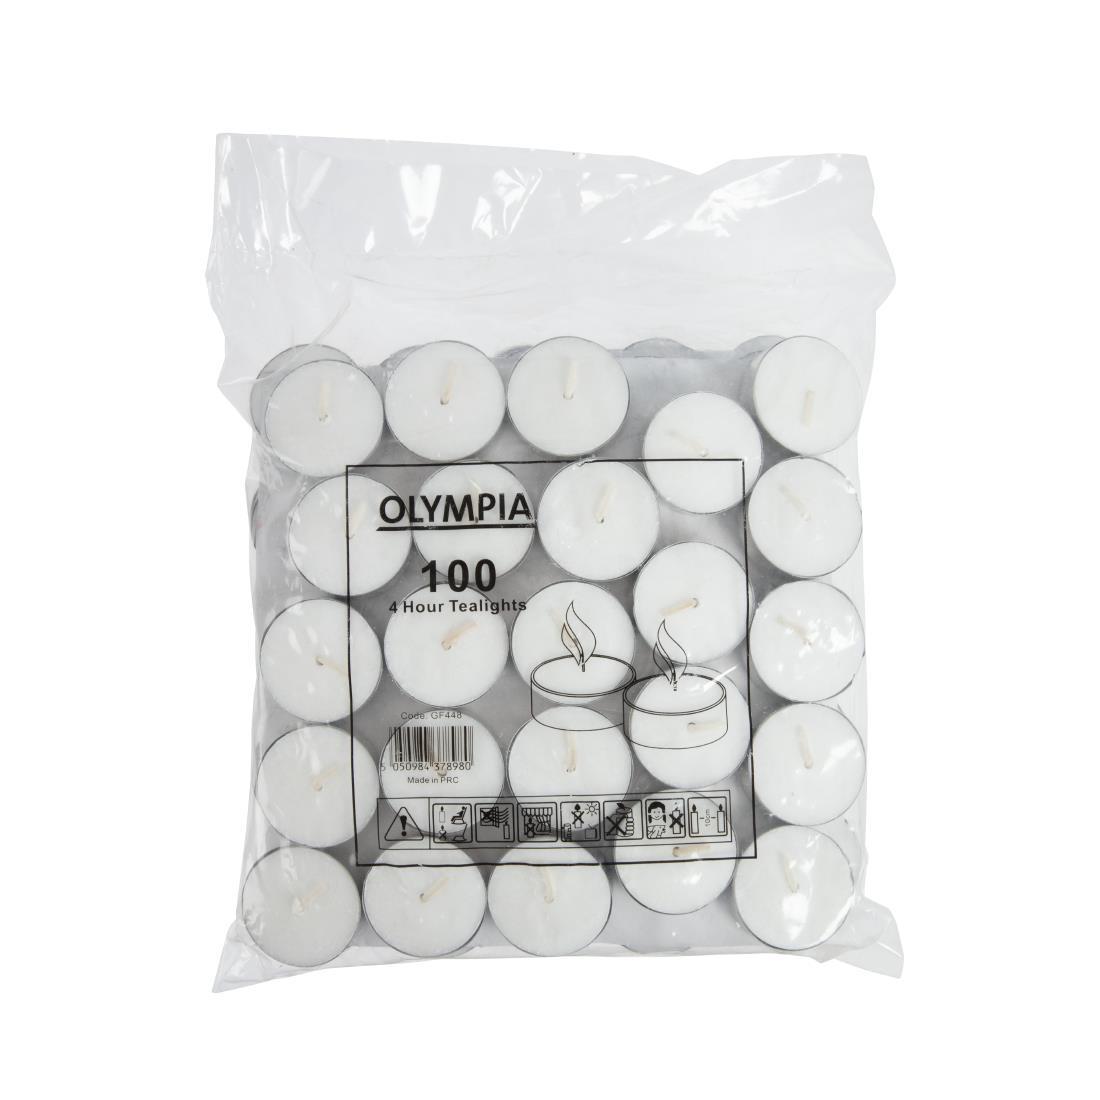 Olympia 4 Hour Tealights (Pack of 100) - GF448  - 1